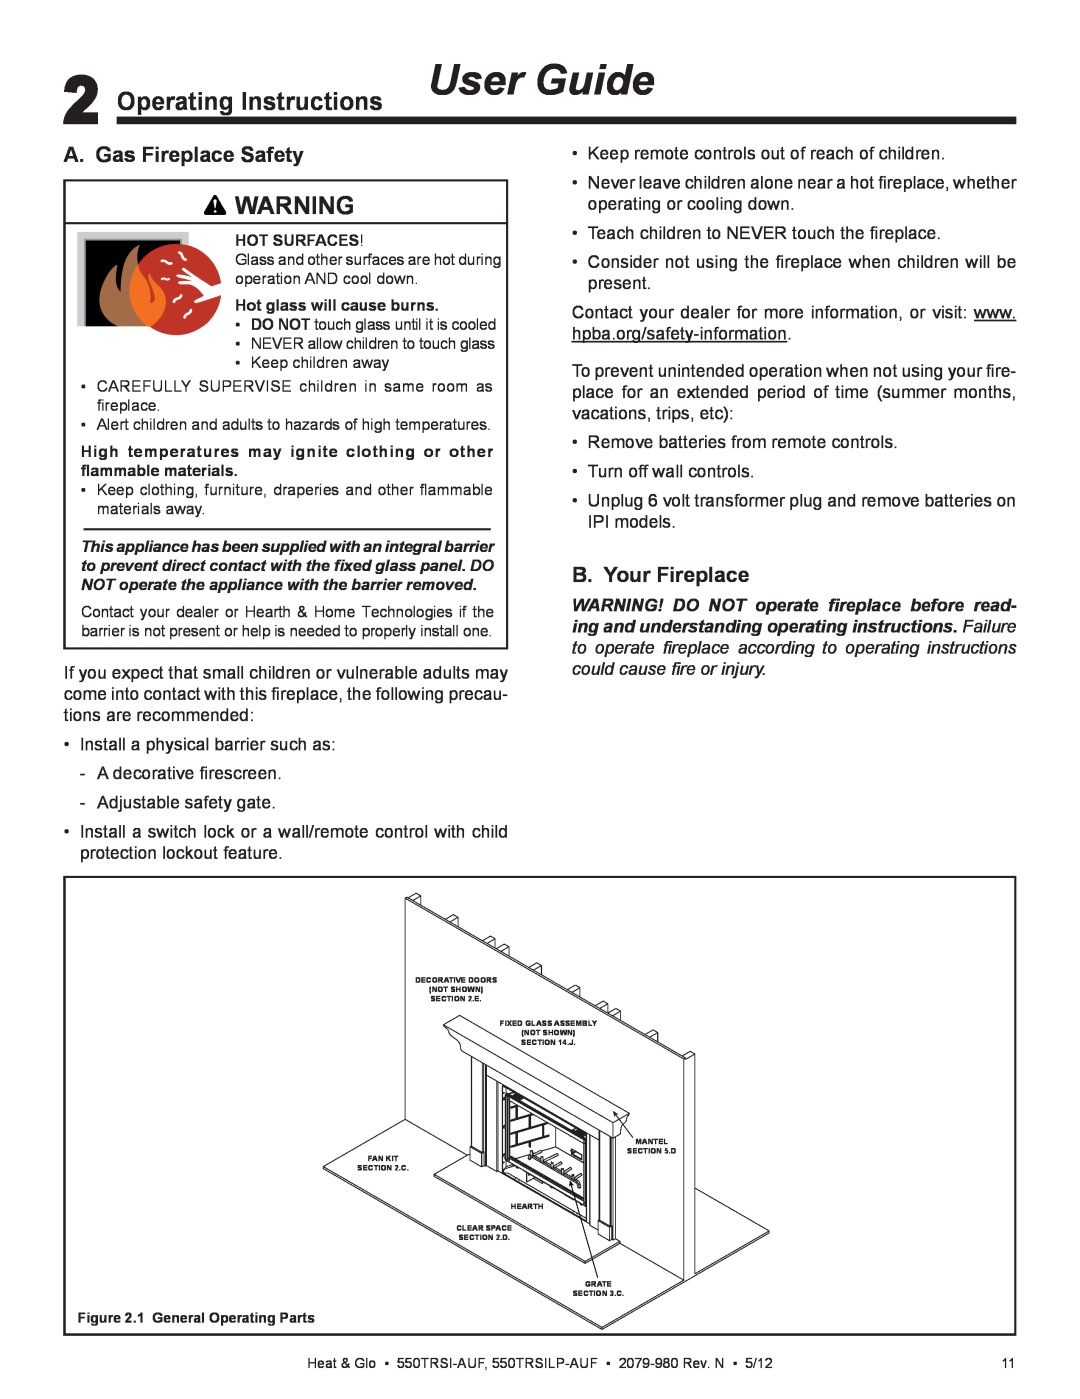 Heat & Glo LifeStyle 550TRSI-AUF owner manual Operating Instructions User Guide, A. Gas Fireplace Safety, B. Your Fireplace 